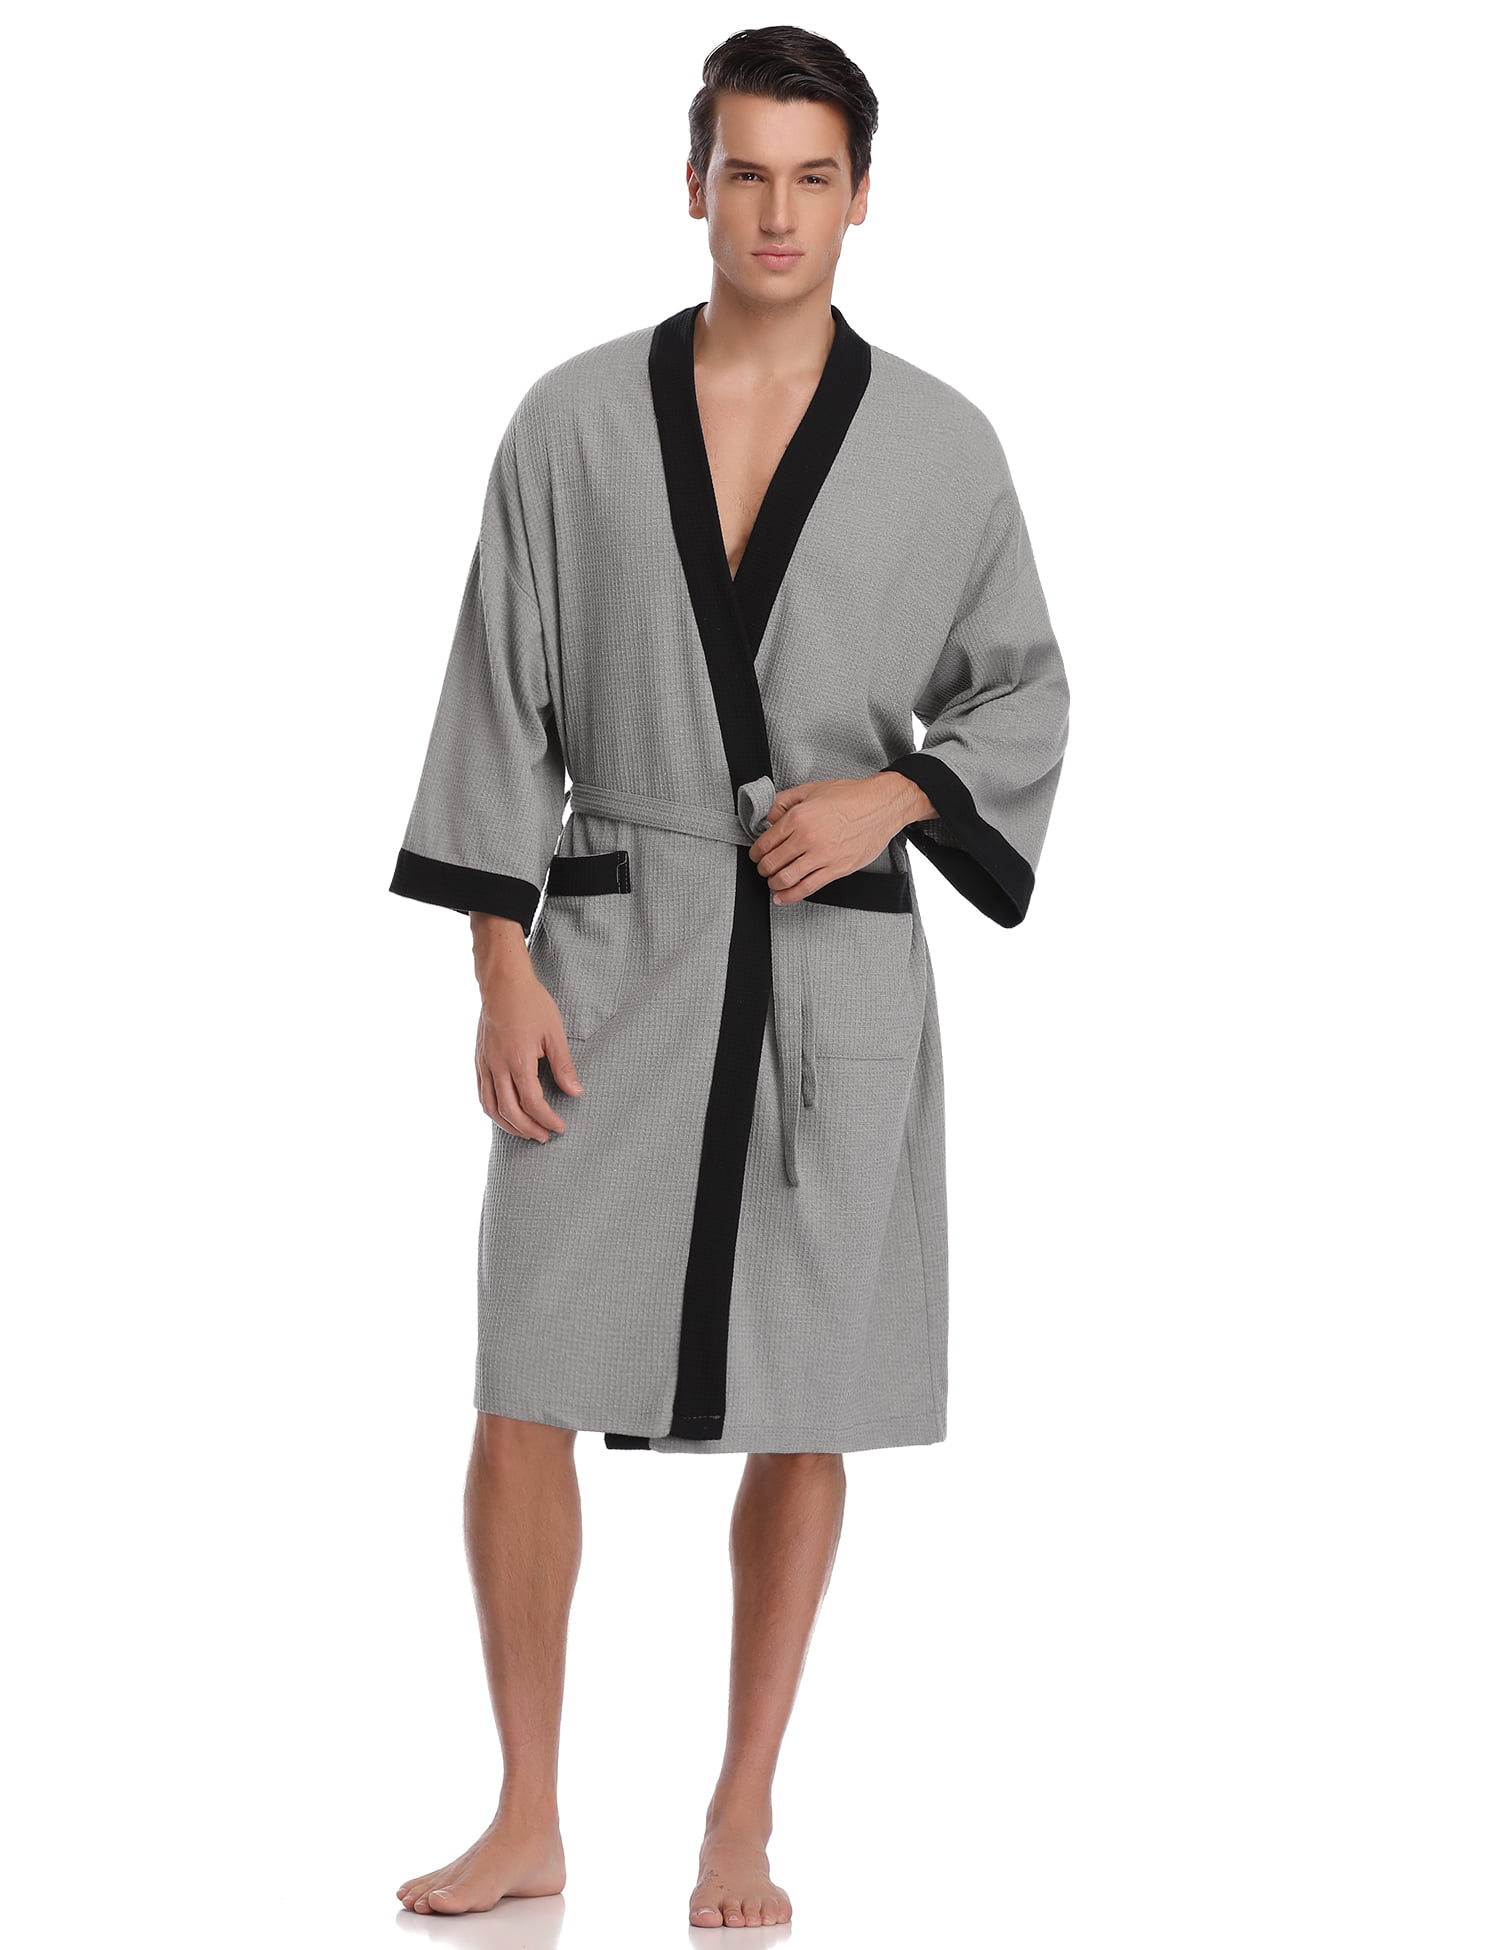 Soft Cotton Full Length Nightwear Dressing Gown Robe with Pockets for Men & Women Aibrou Bathrobe 